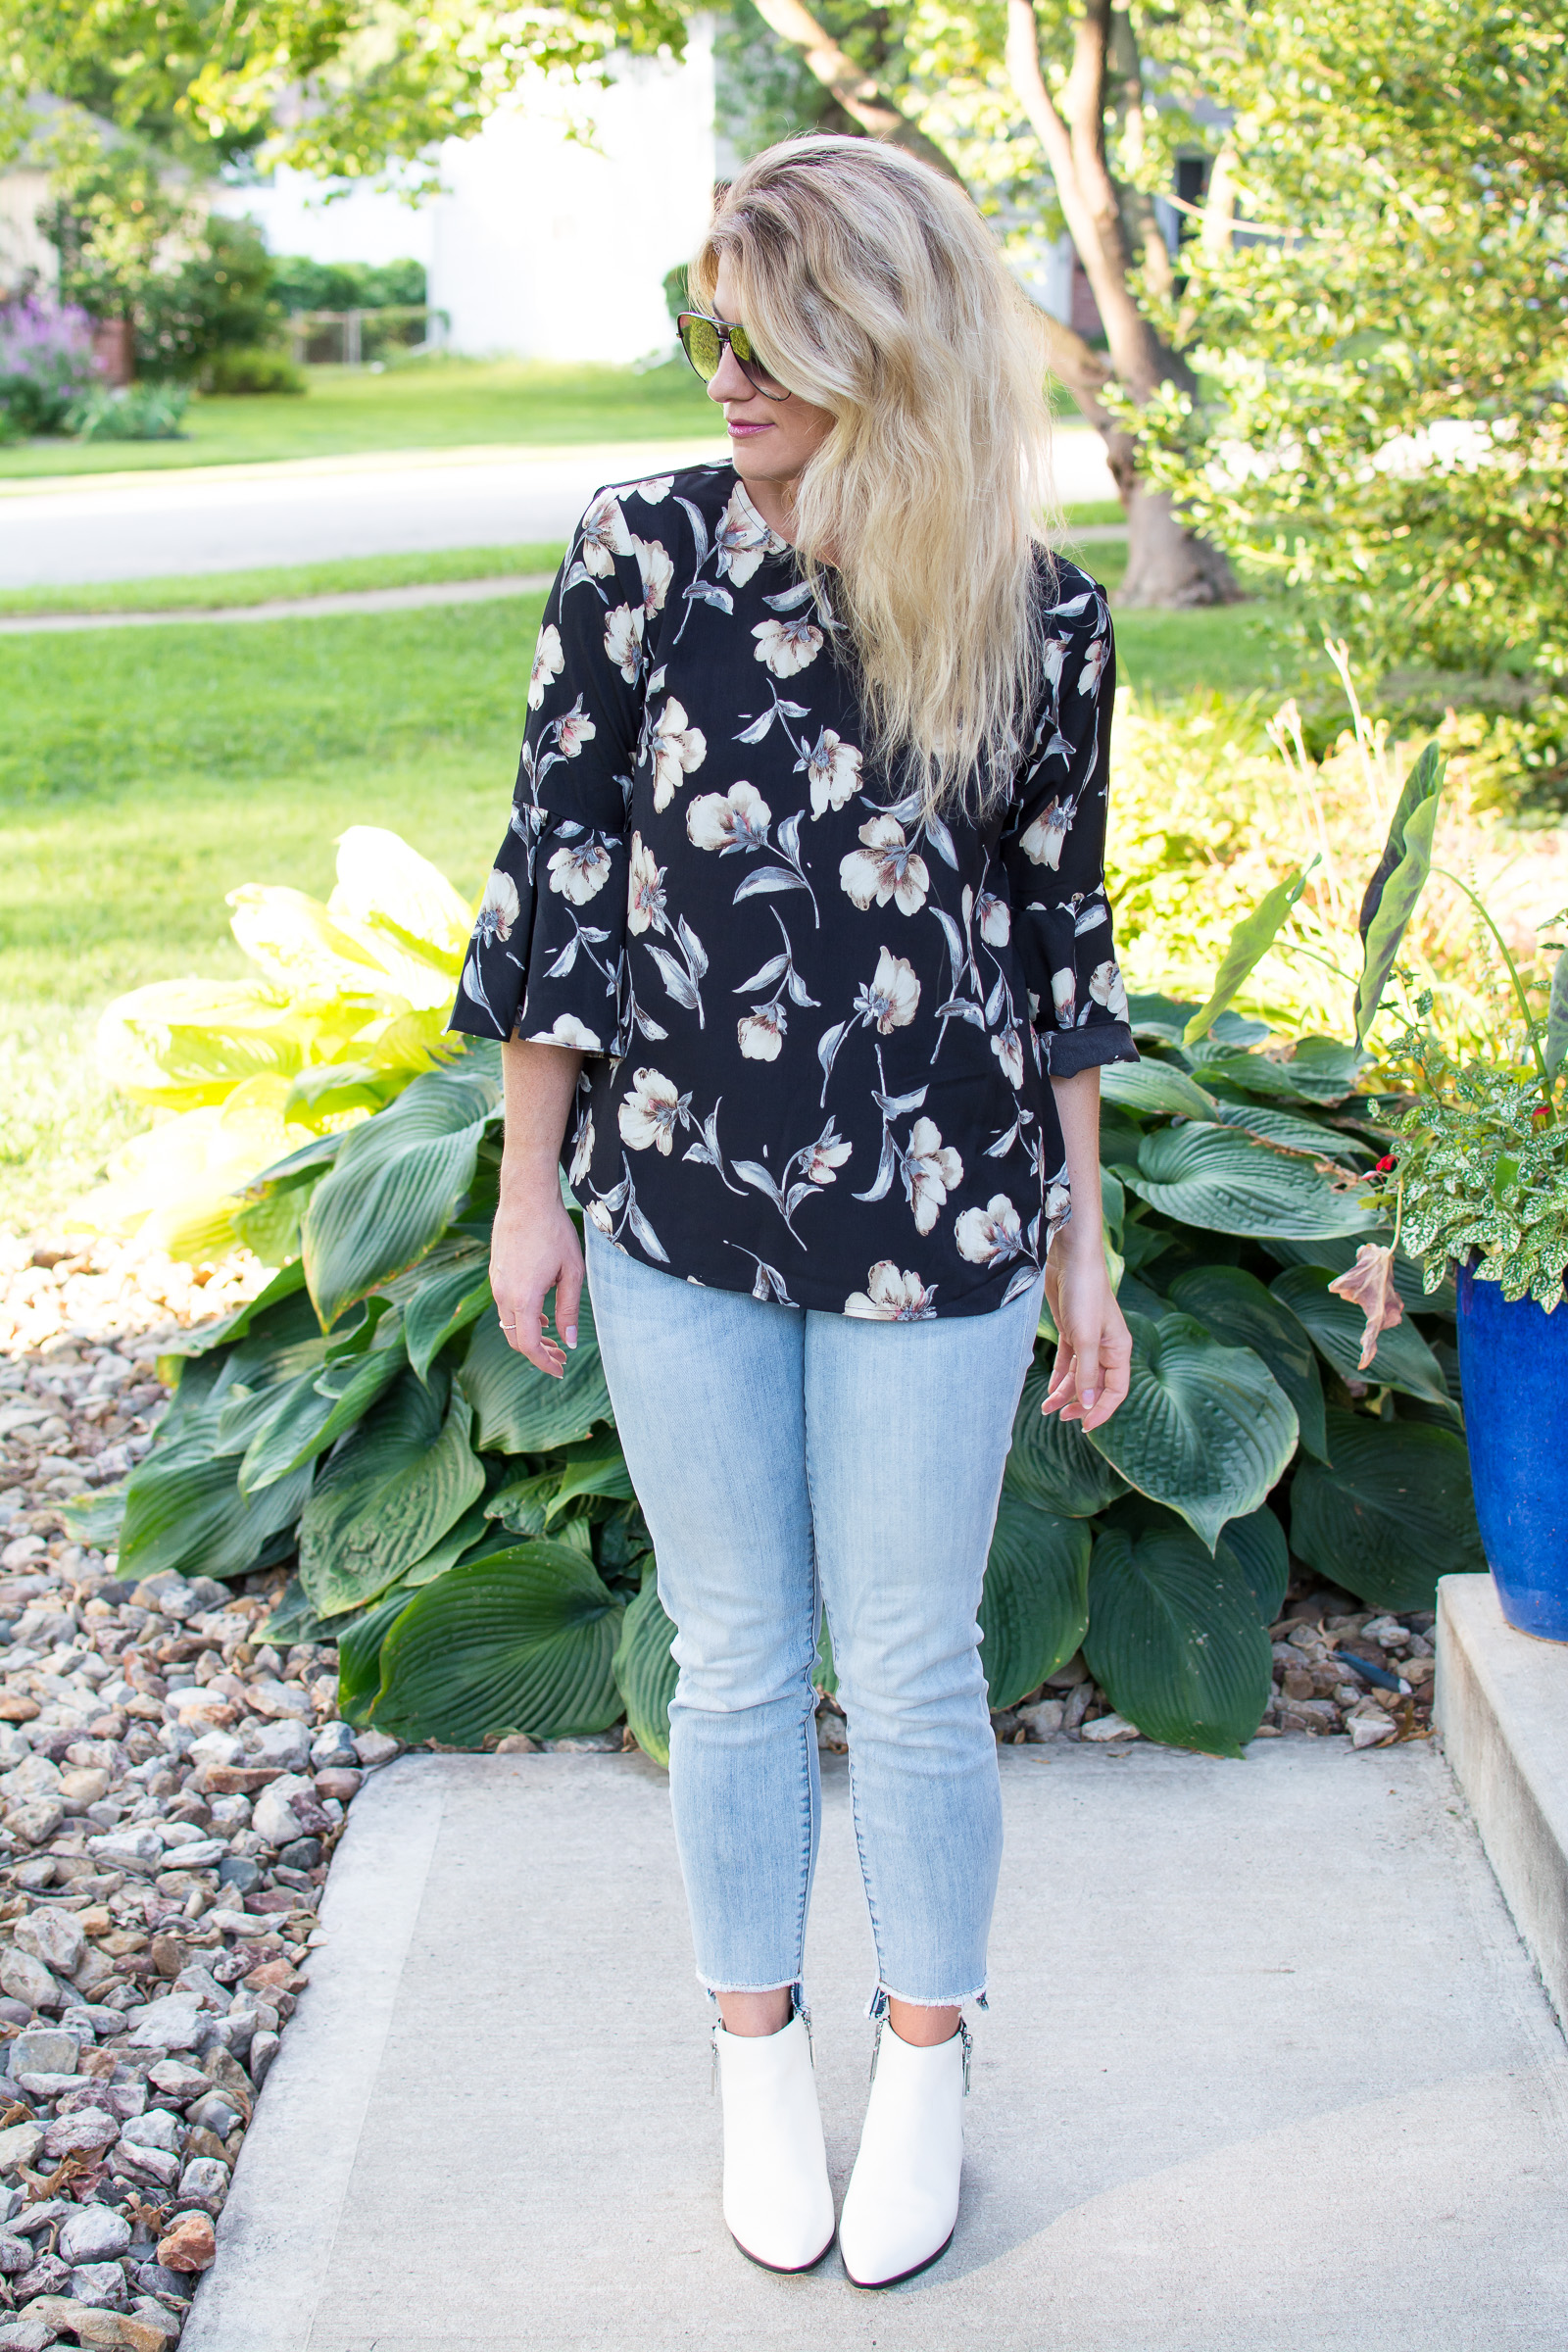 Shabby2Chic Floral Blouse + White Booties. | Le Stylo Rouge